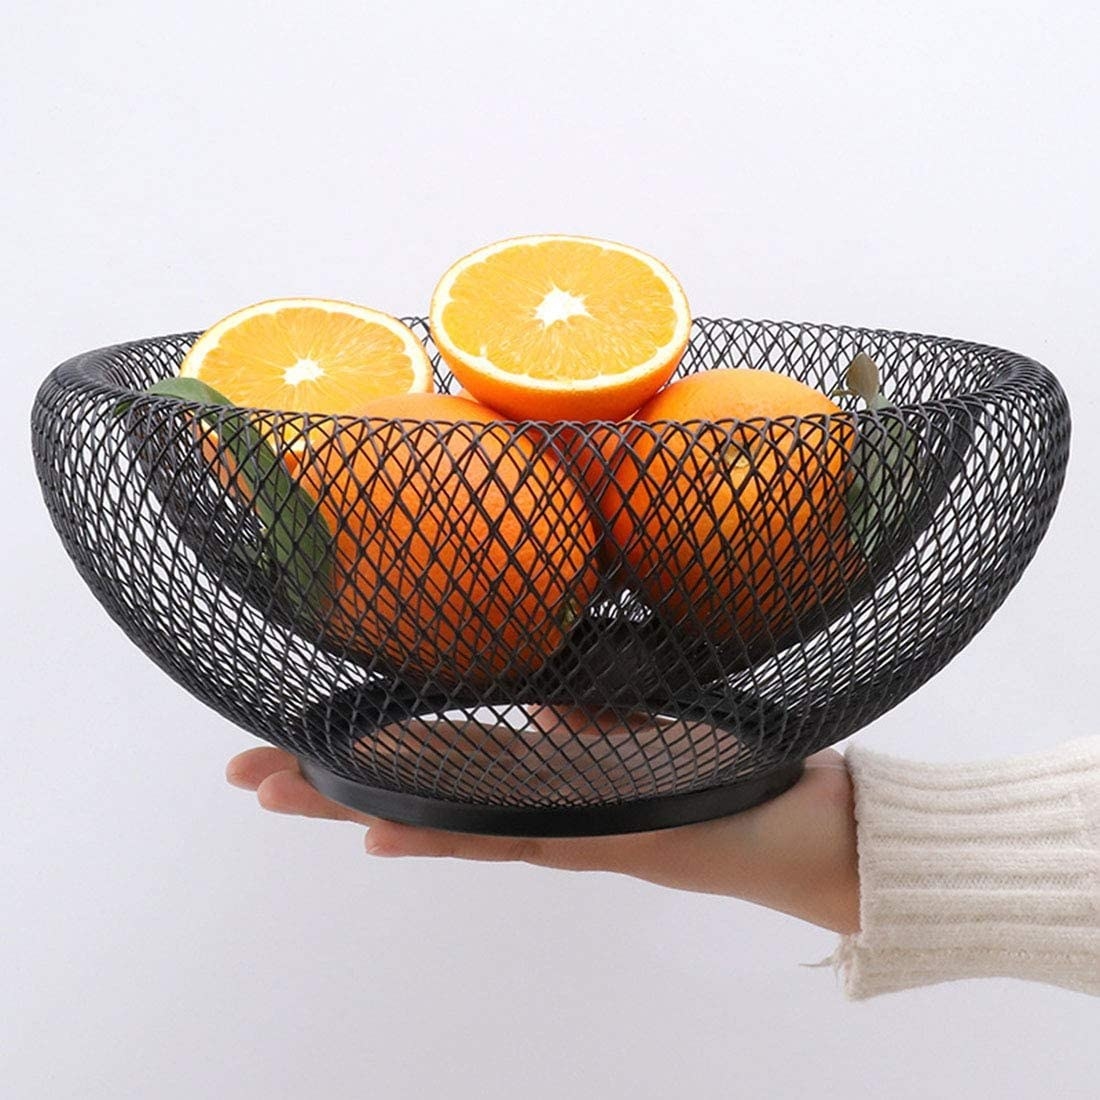 A person holding the mesh bowl with citrus fruit inside